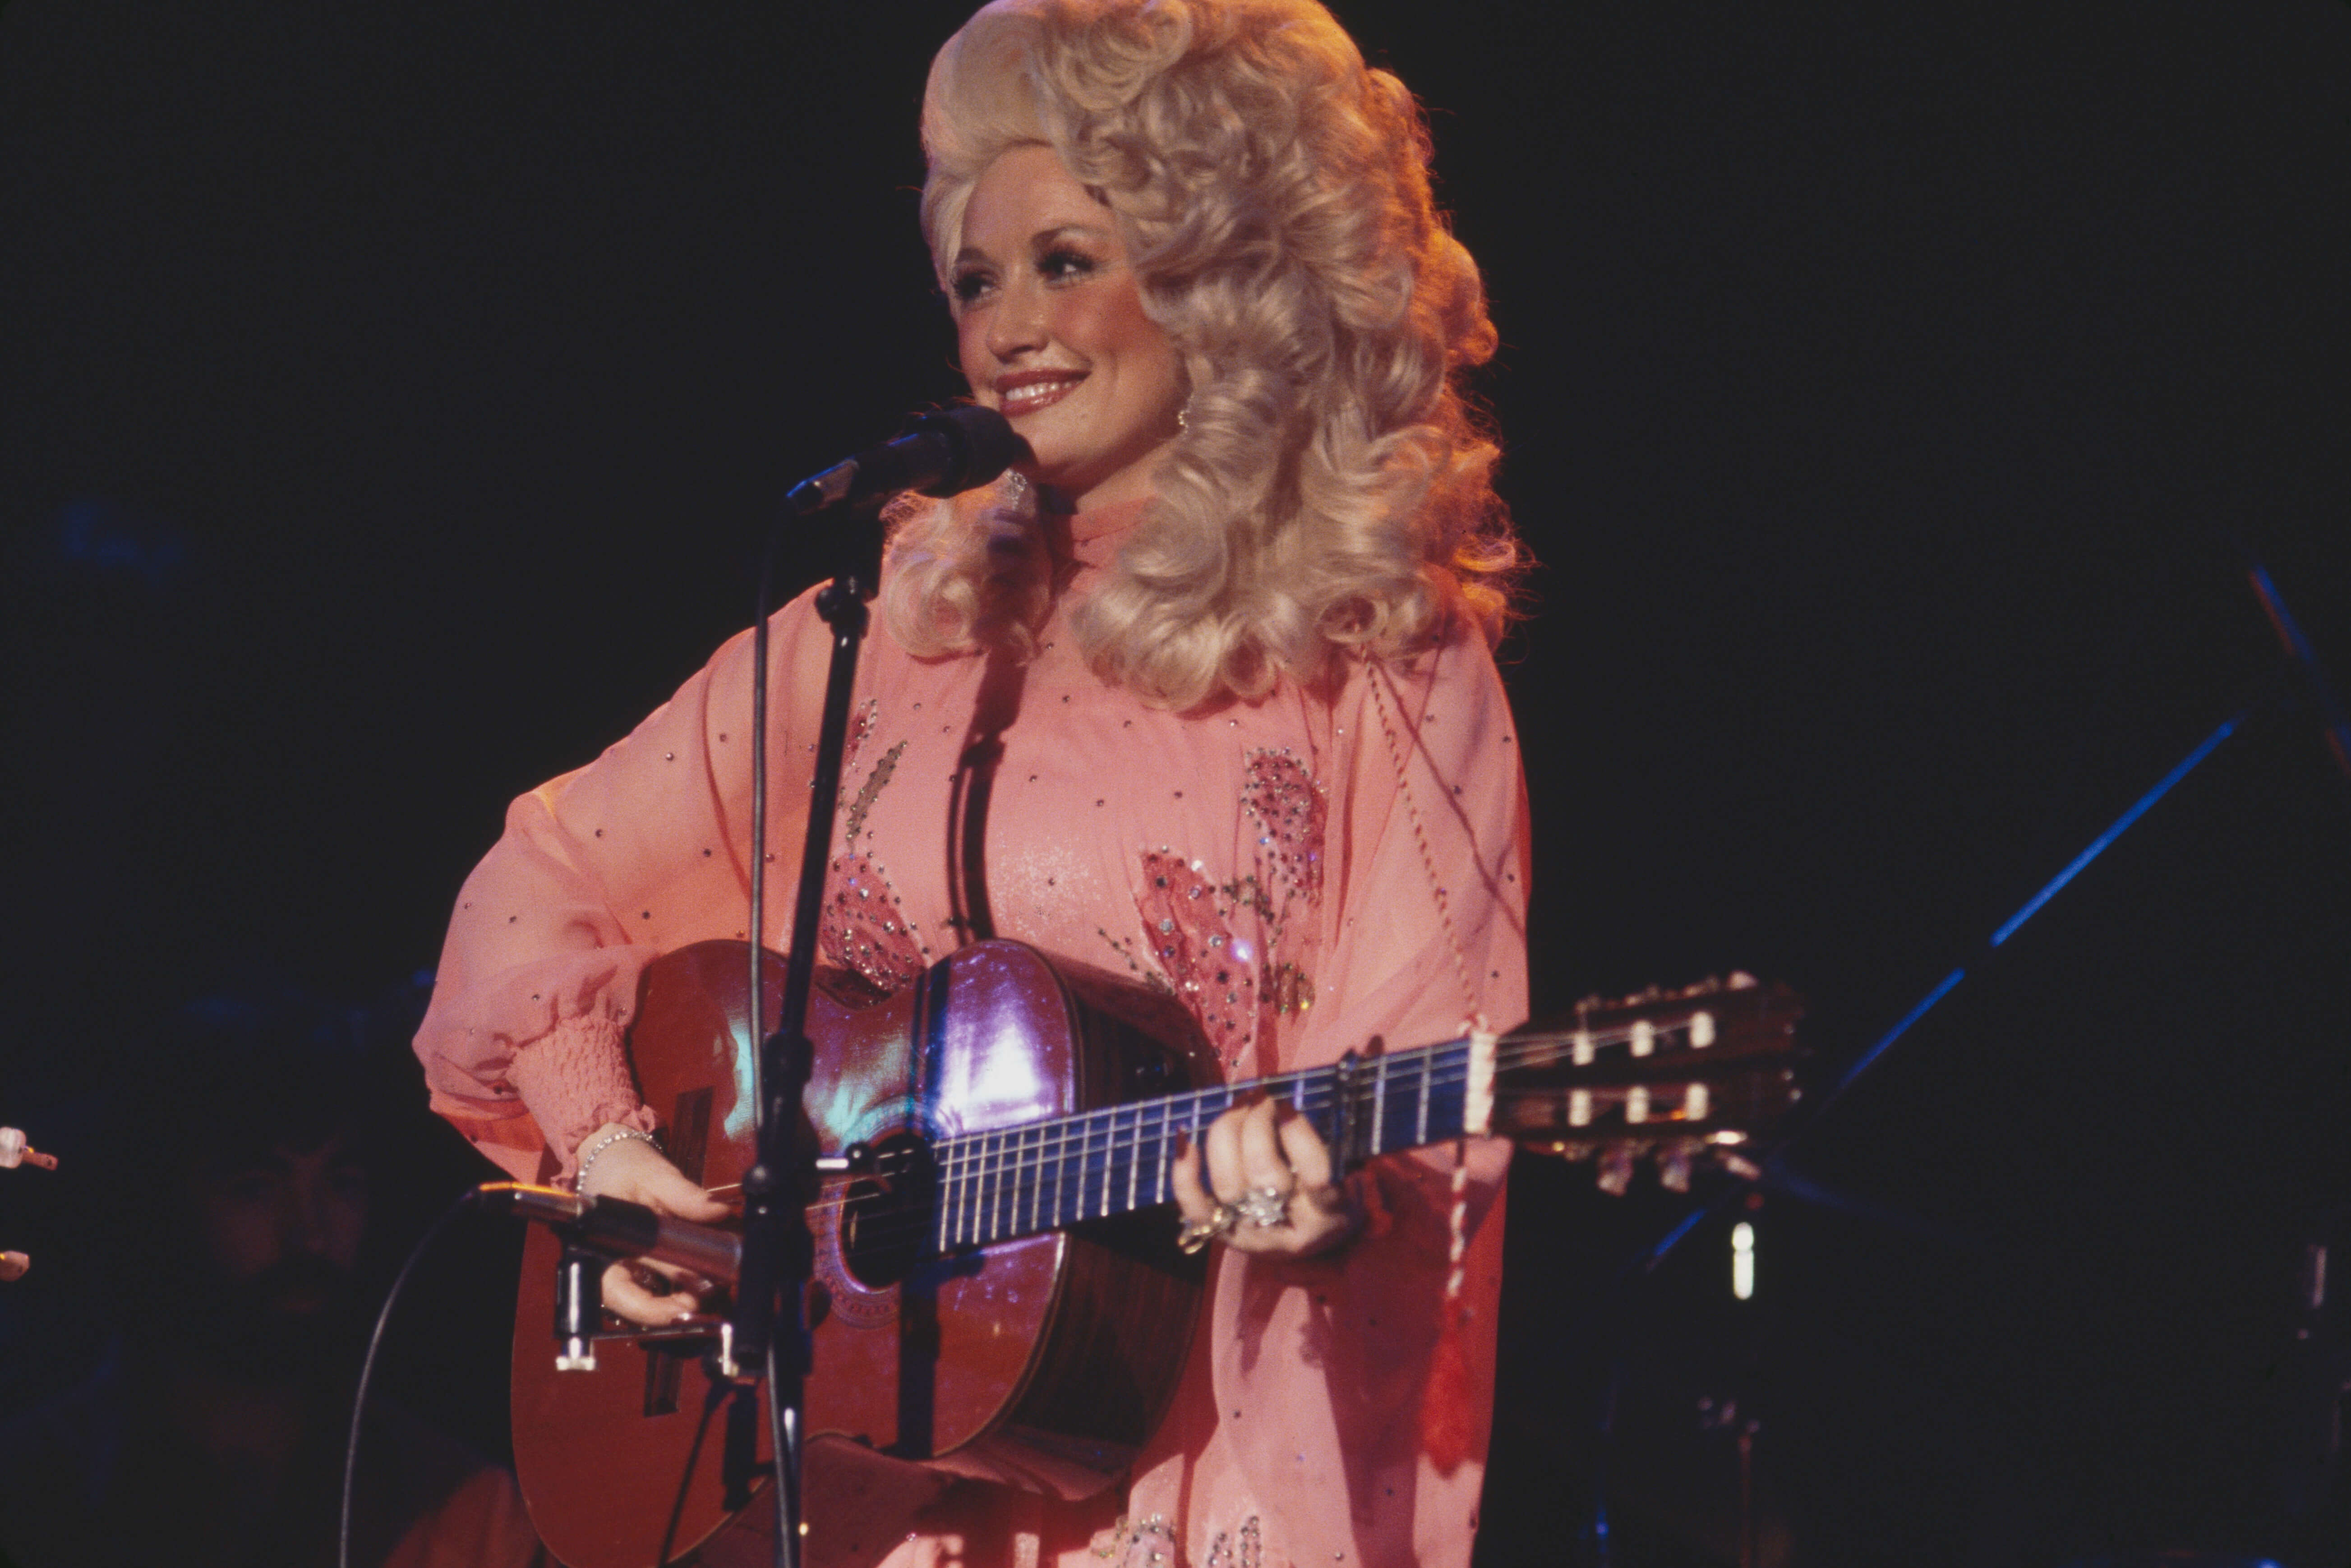 Dolly Parton plays guitar and sings in a pink dress.